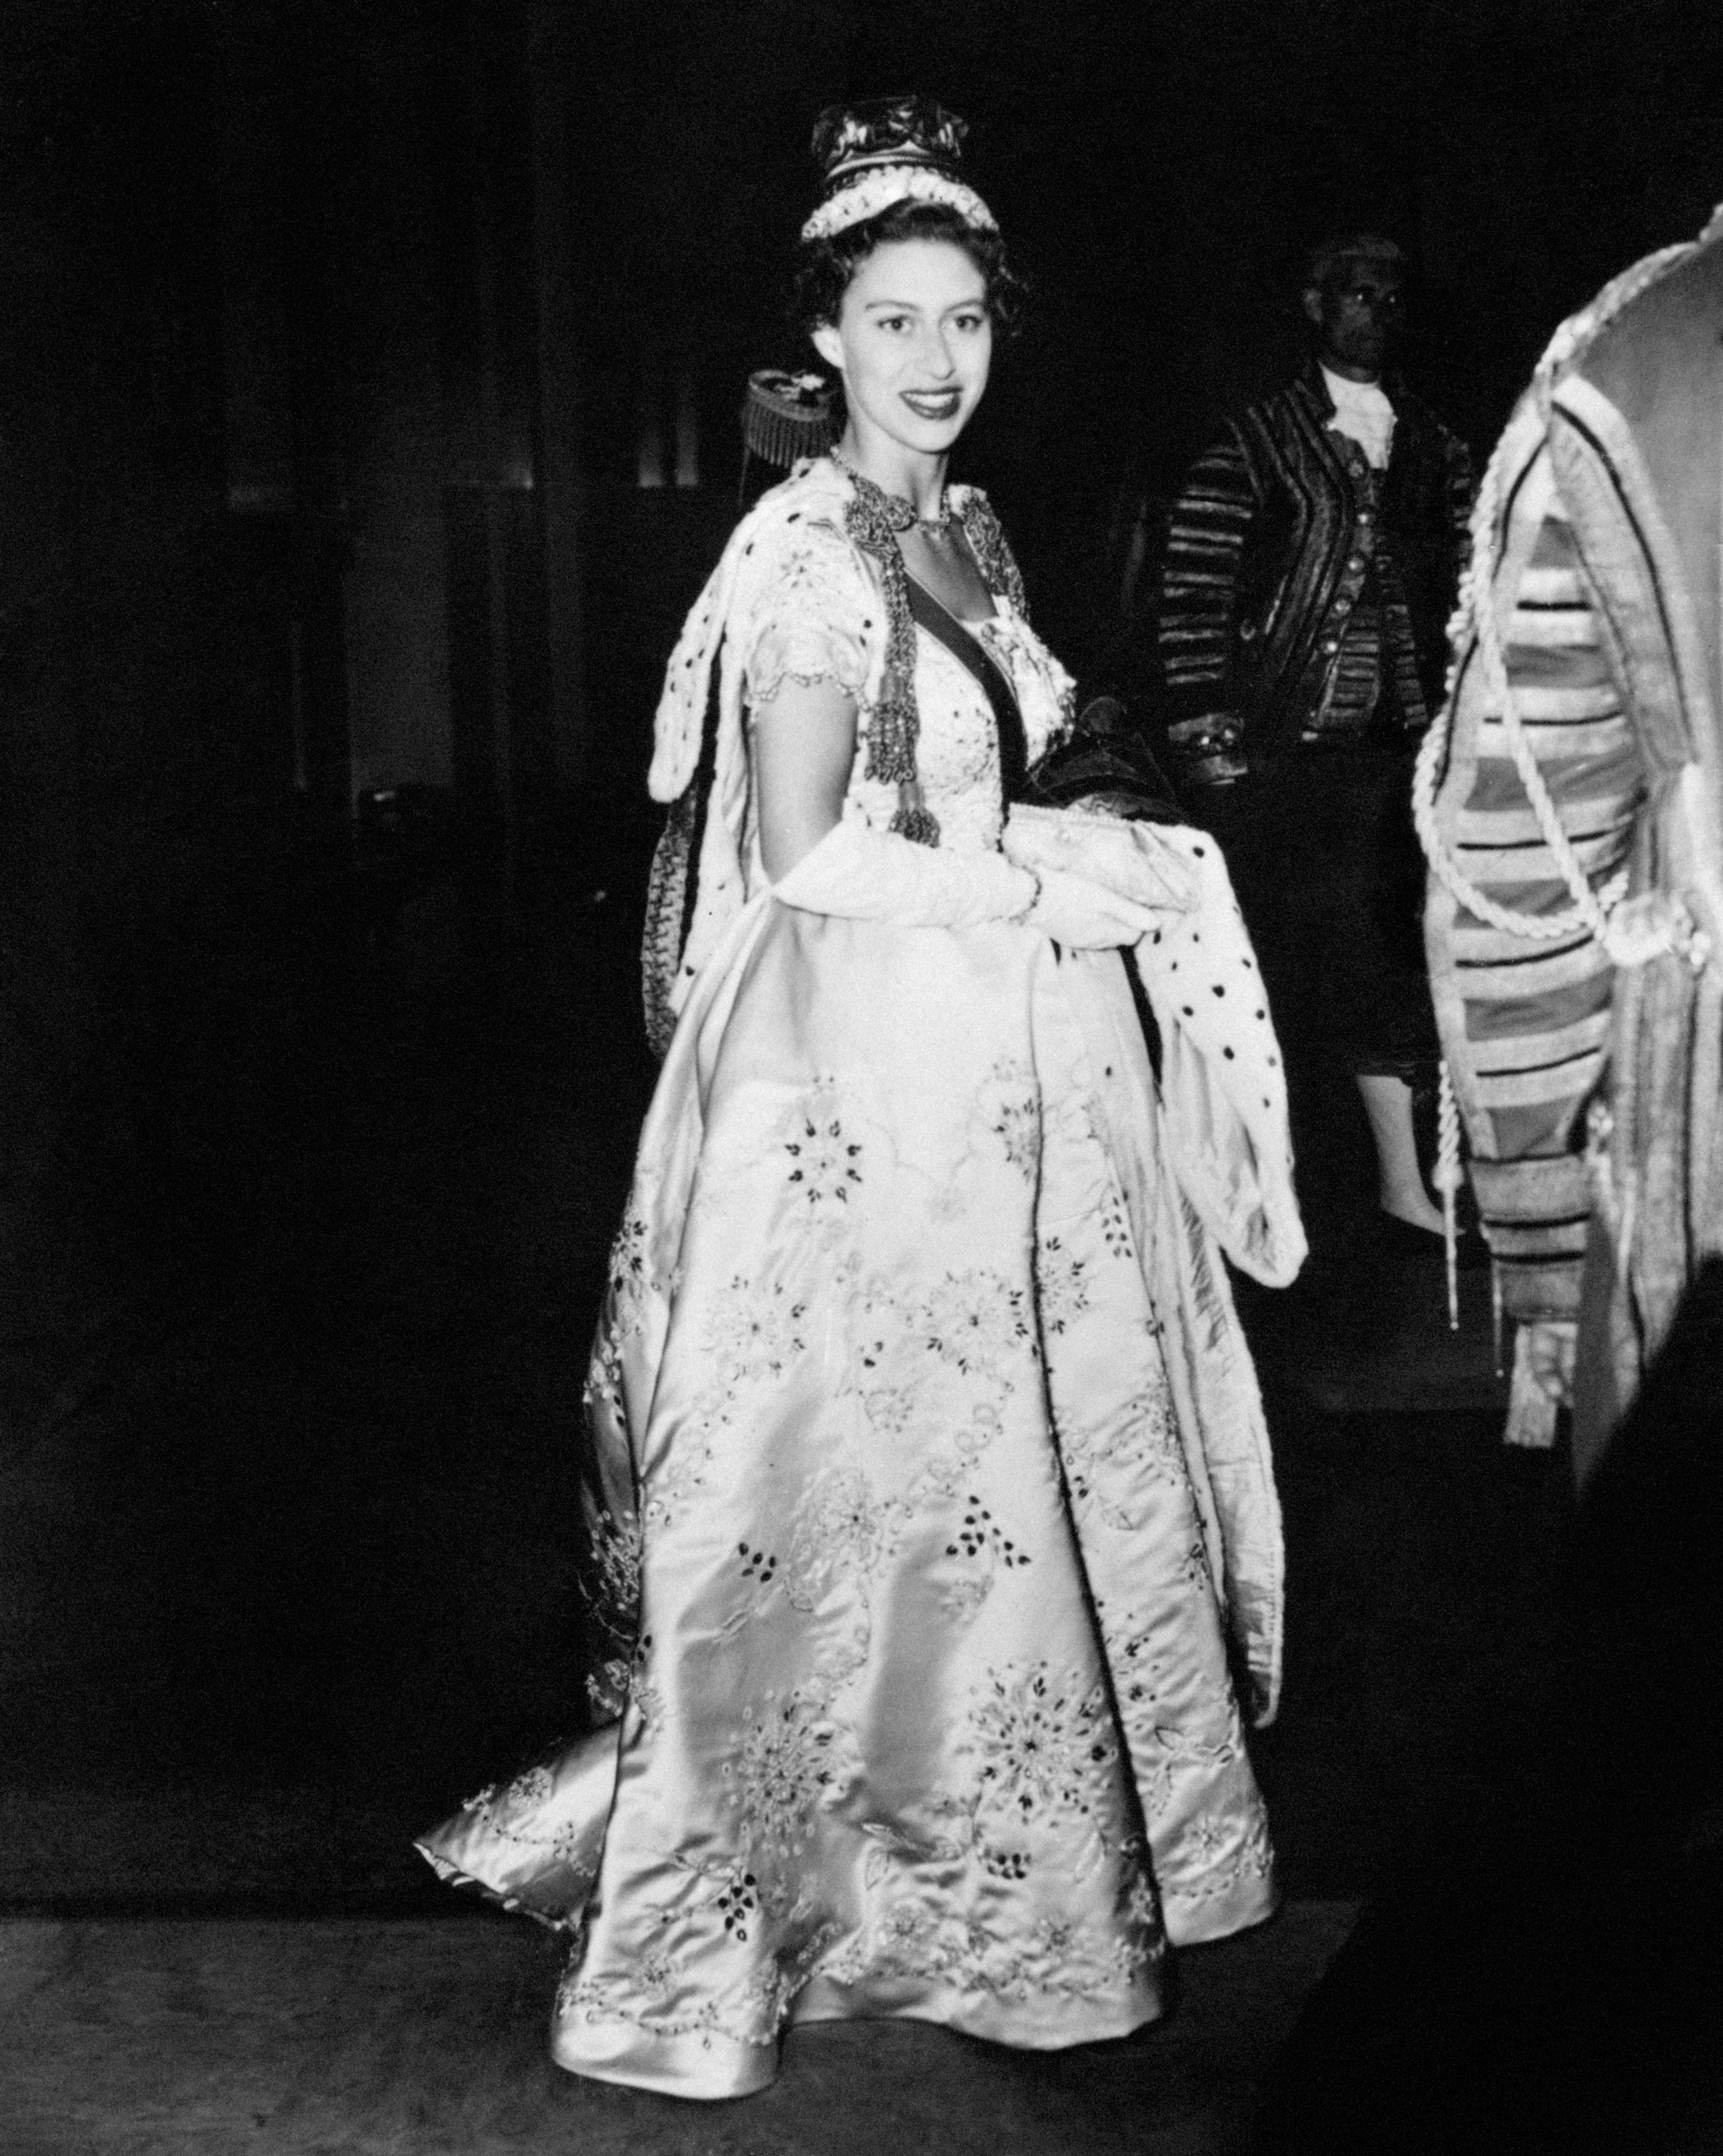 Princess Margaret at Buckingham Palace after the Coronation of her sister Queen Elizabeth II